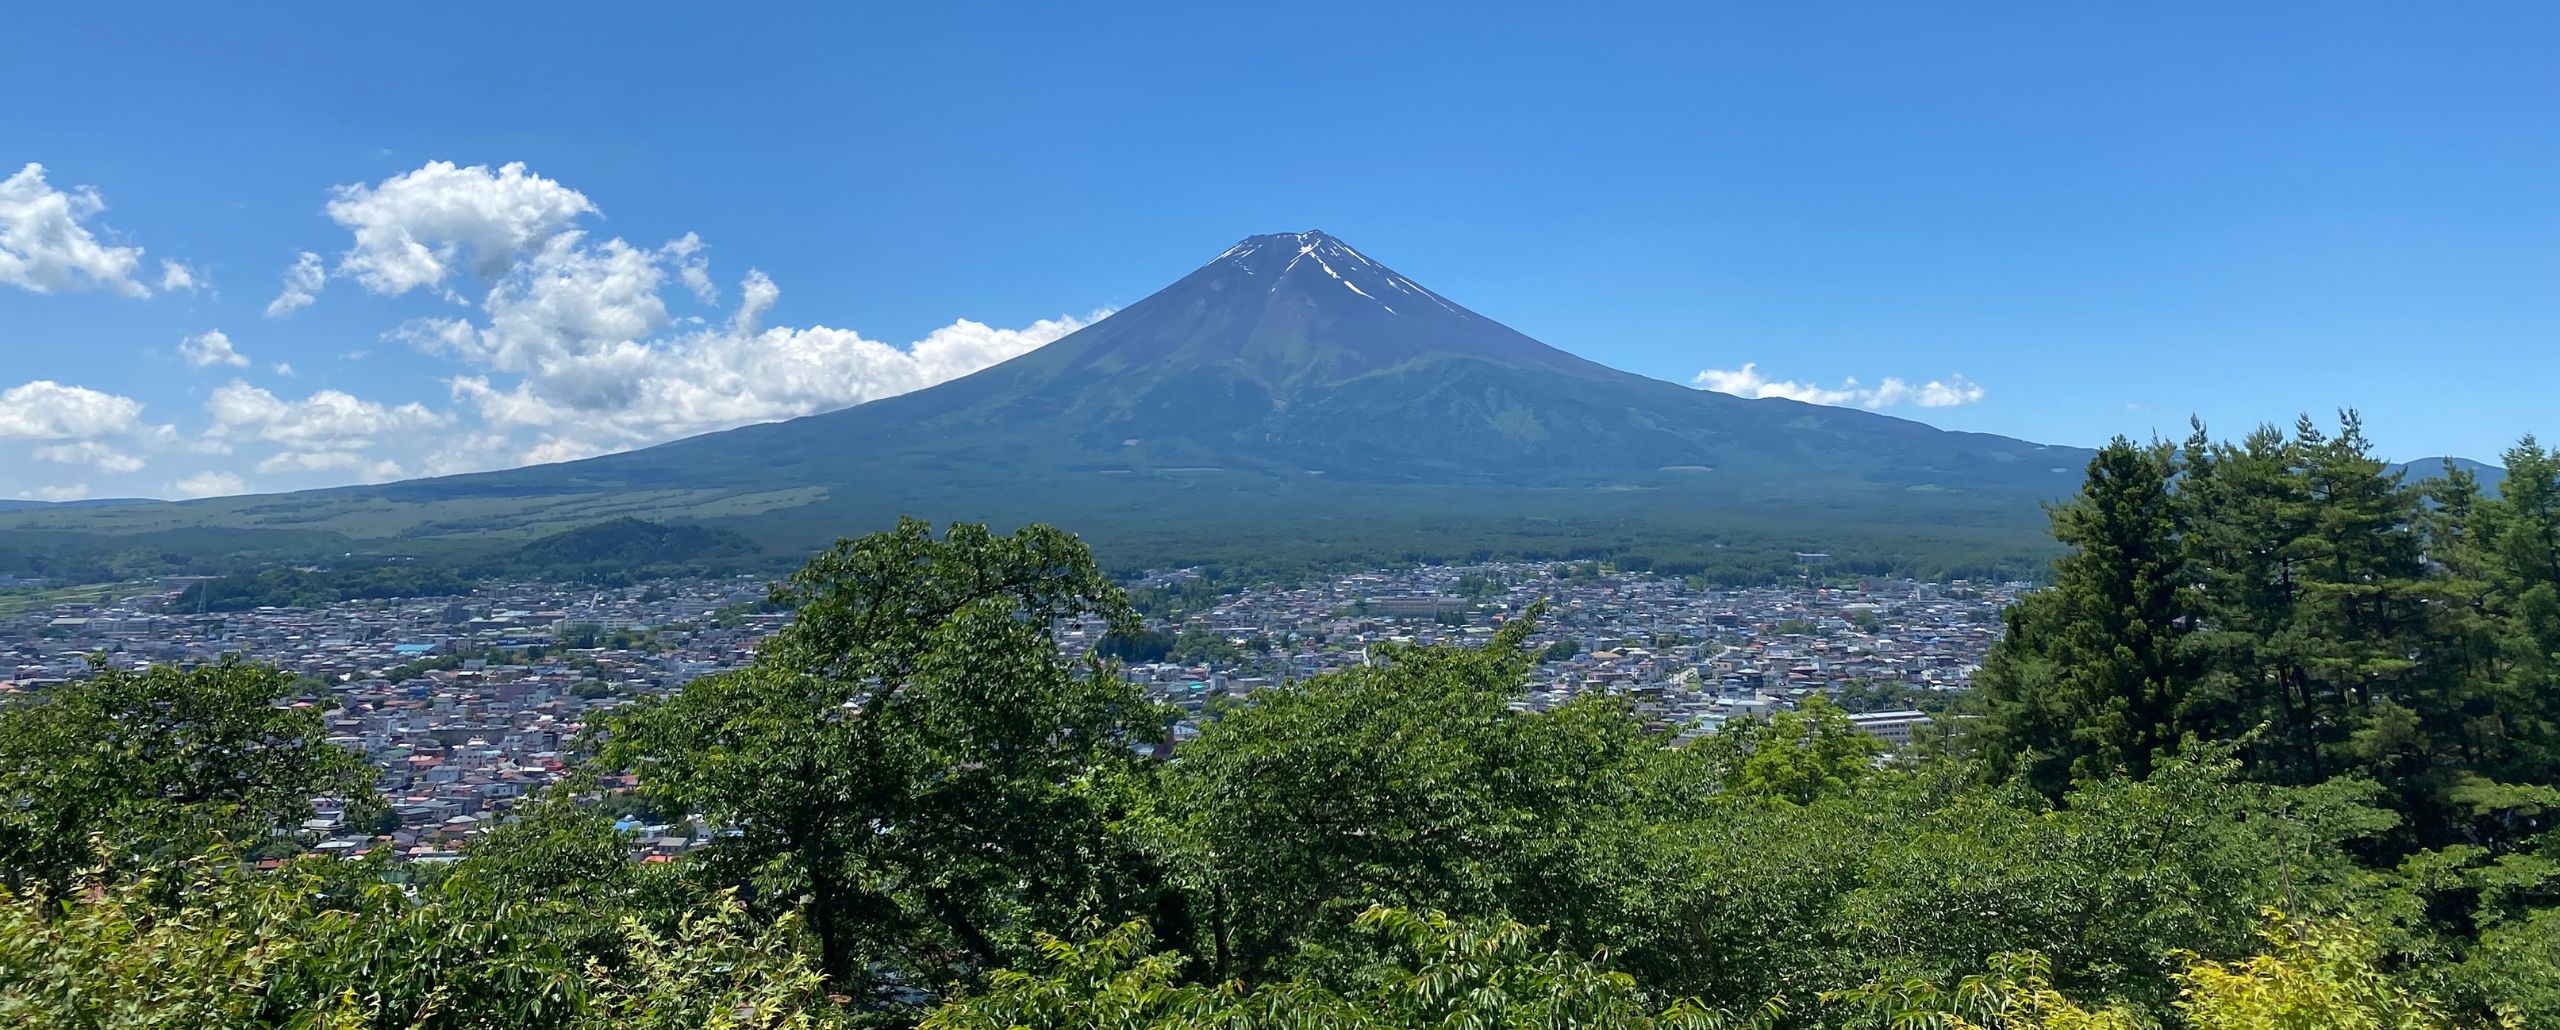 Japan's countryside under the volcano